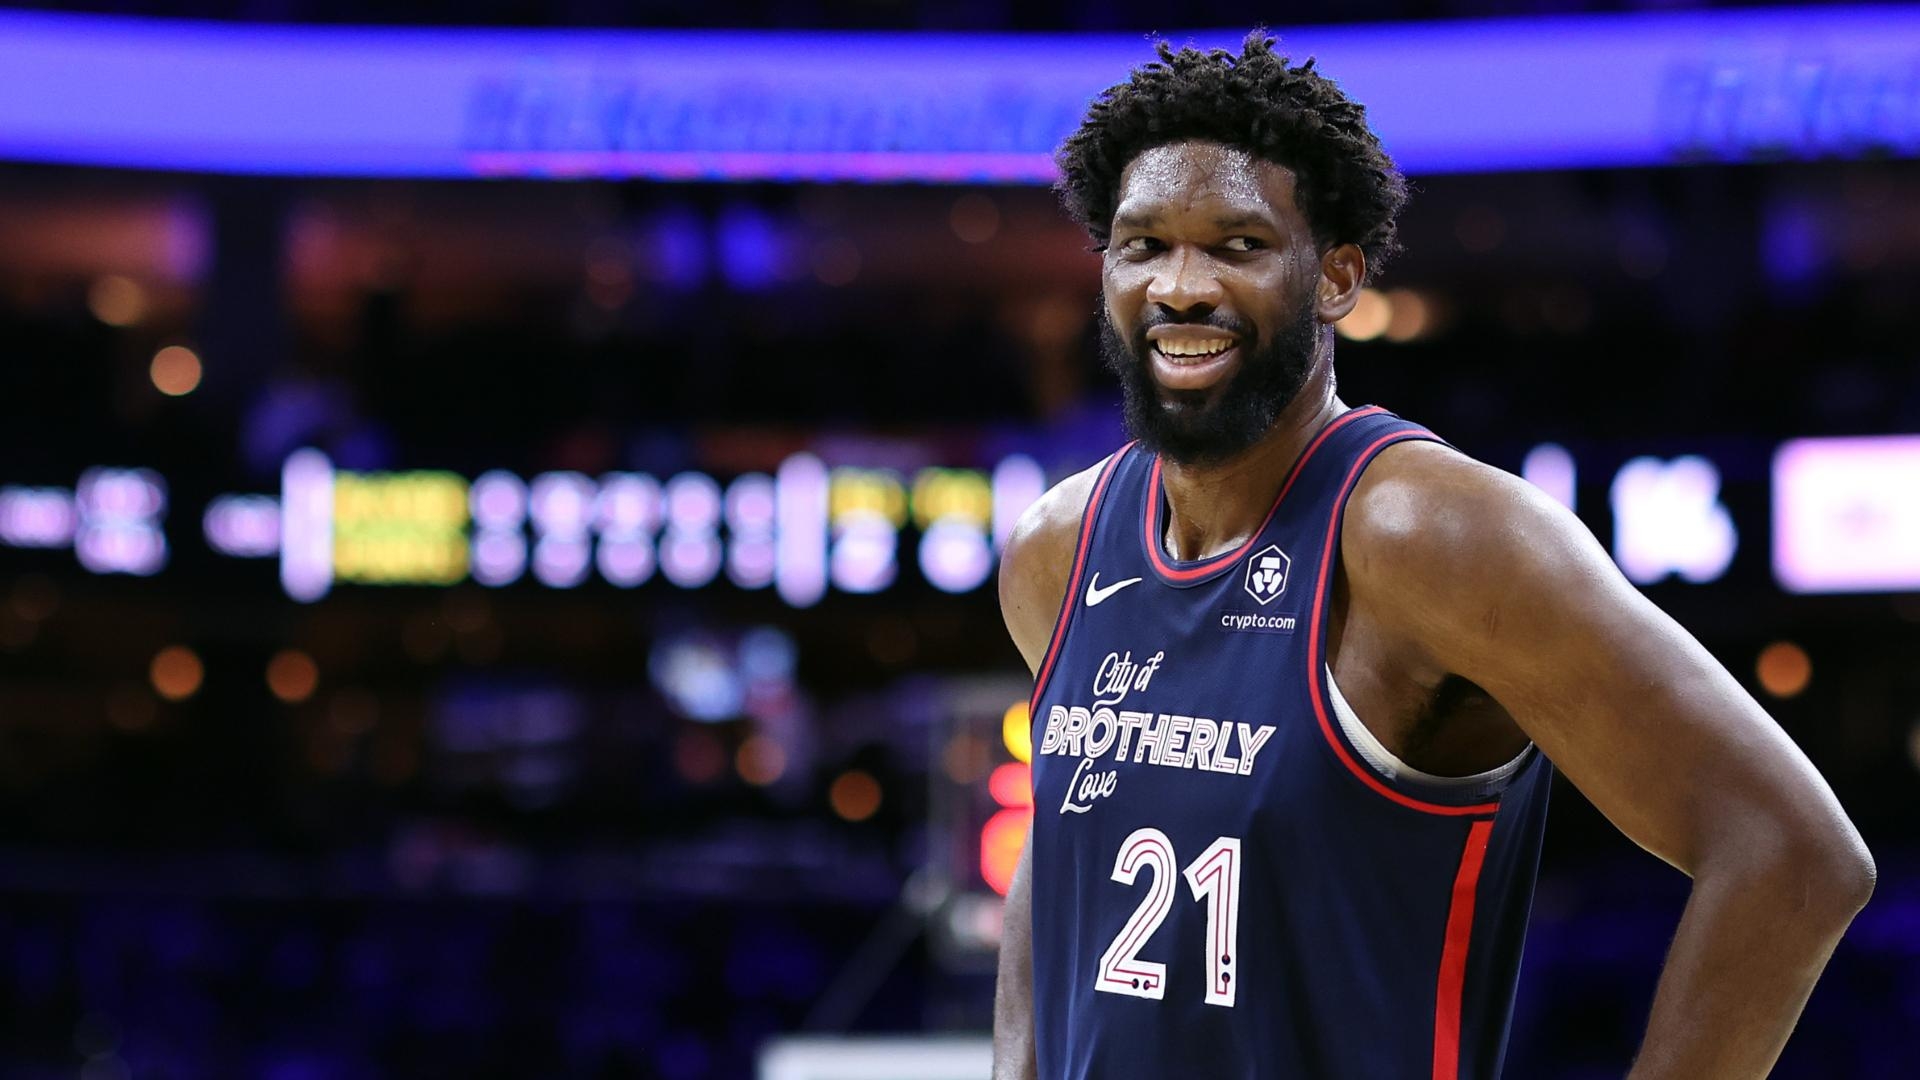 Joel Embiid drops 51 points on the Timberwolves in dominant performance